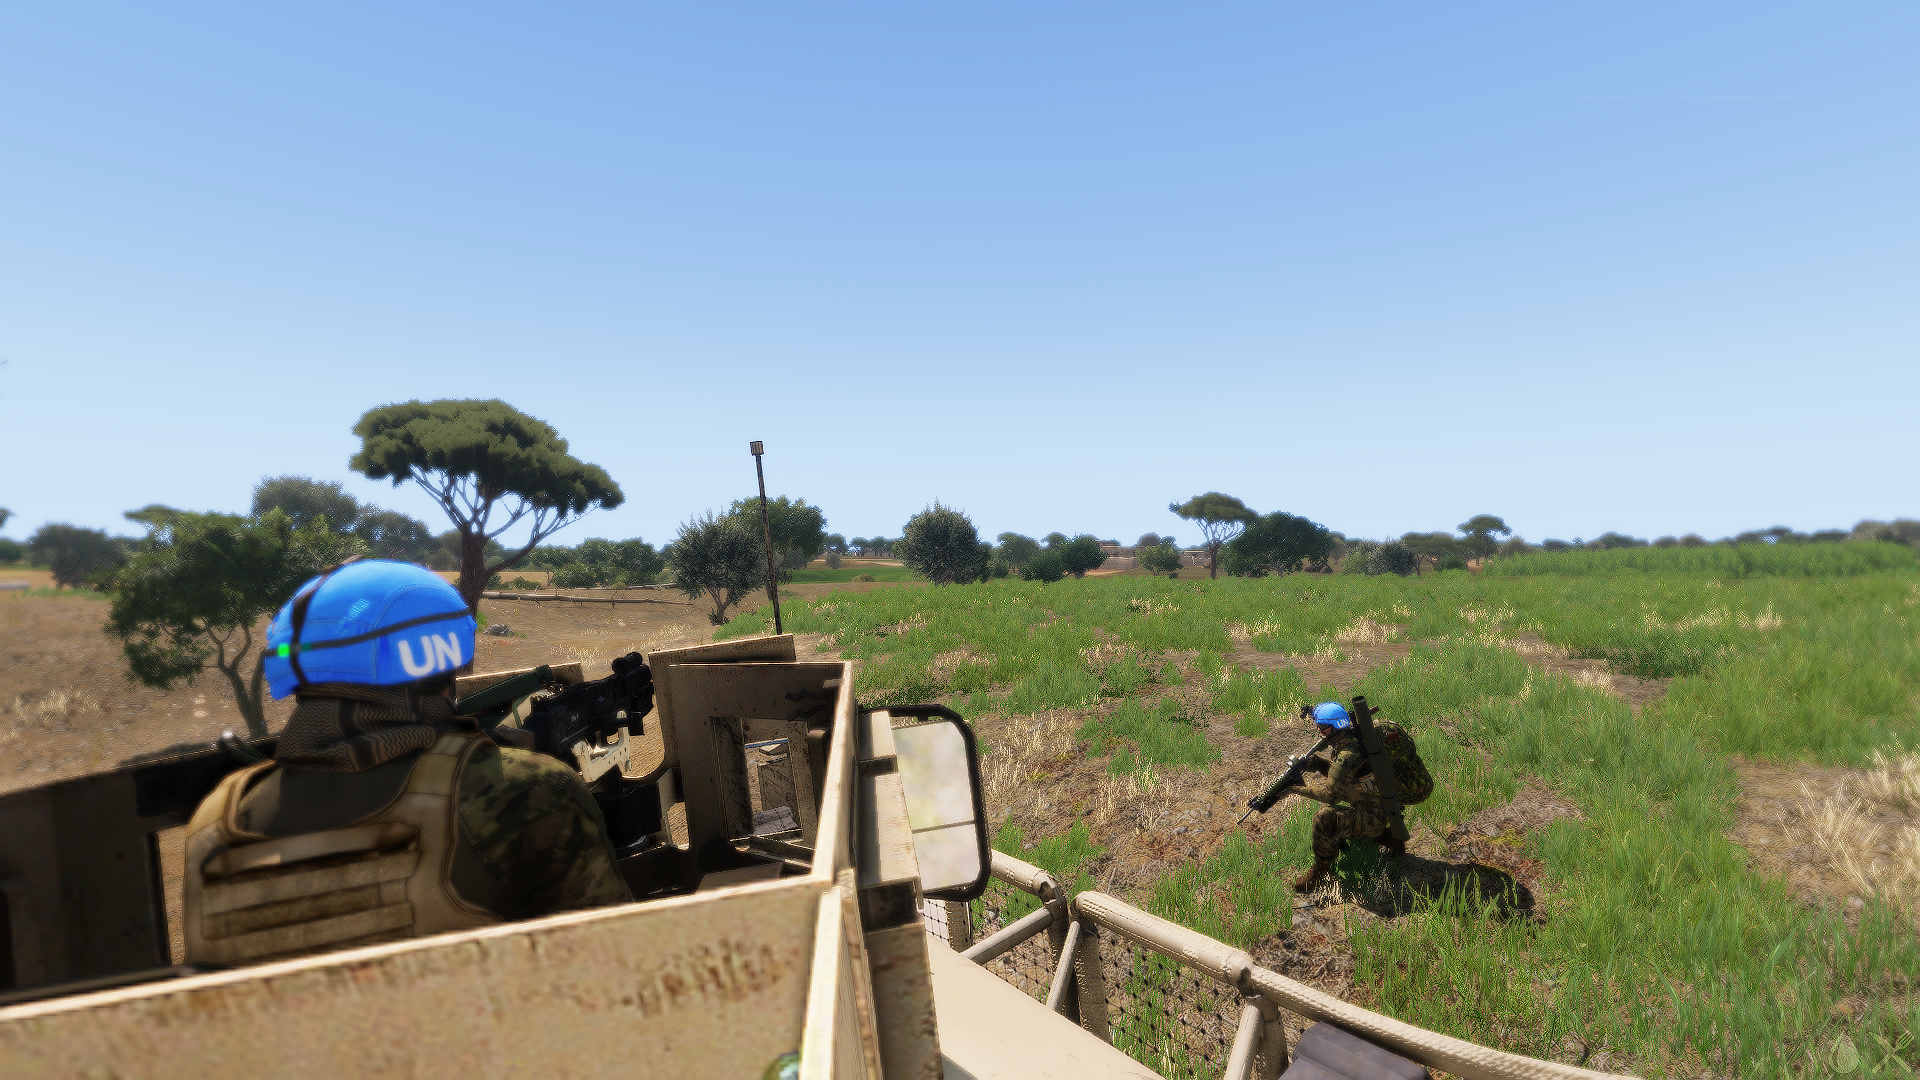 Turret gunner in a firefight against hostile militia forces. Just earlier before this photo was taken, an RPG round landed 100m in front of the MRAP; no one was injured. (FICTIONAL)